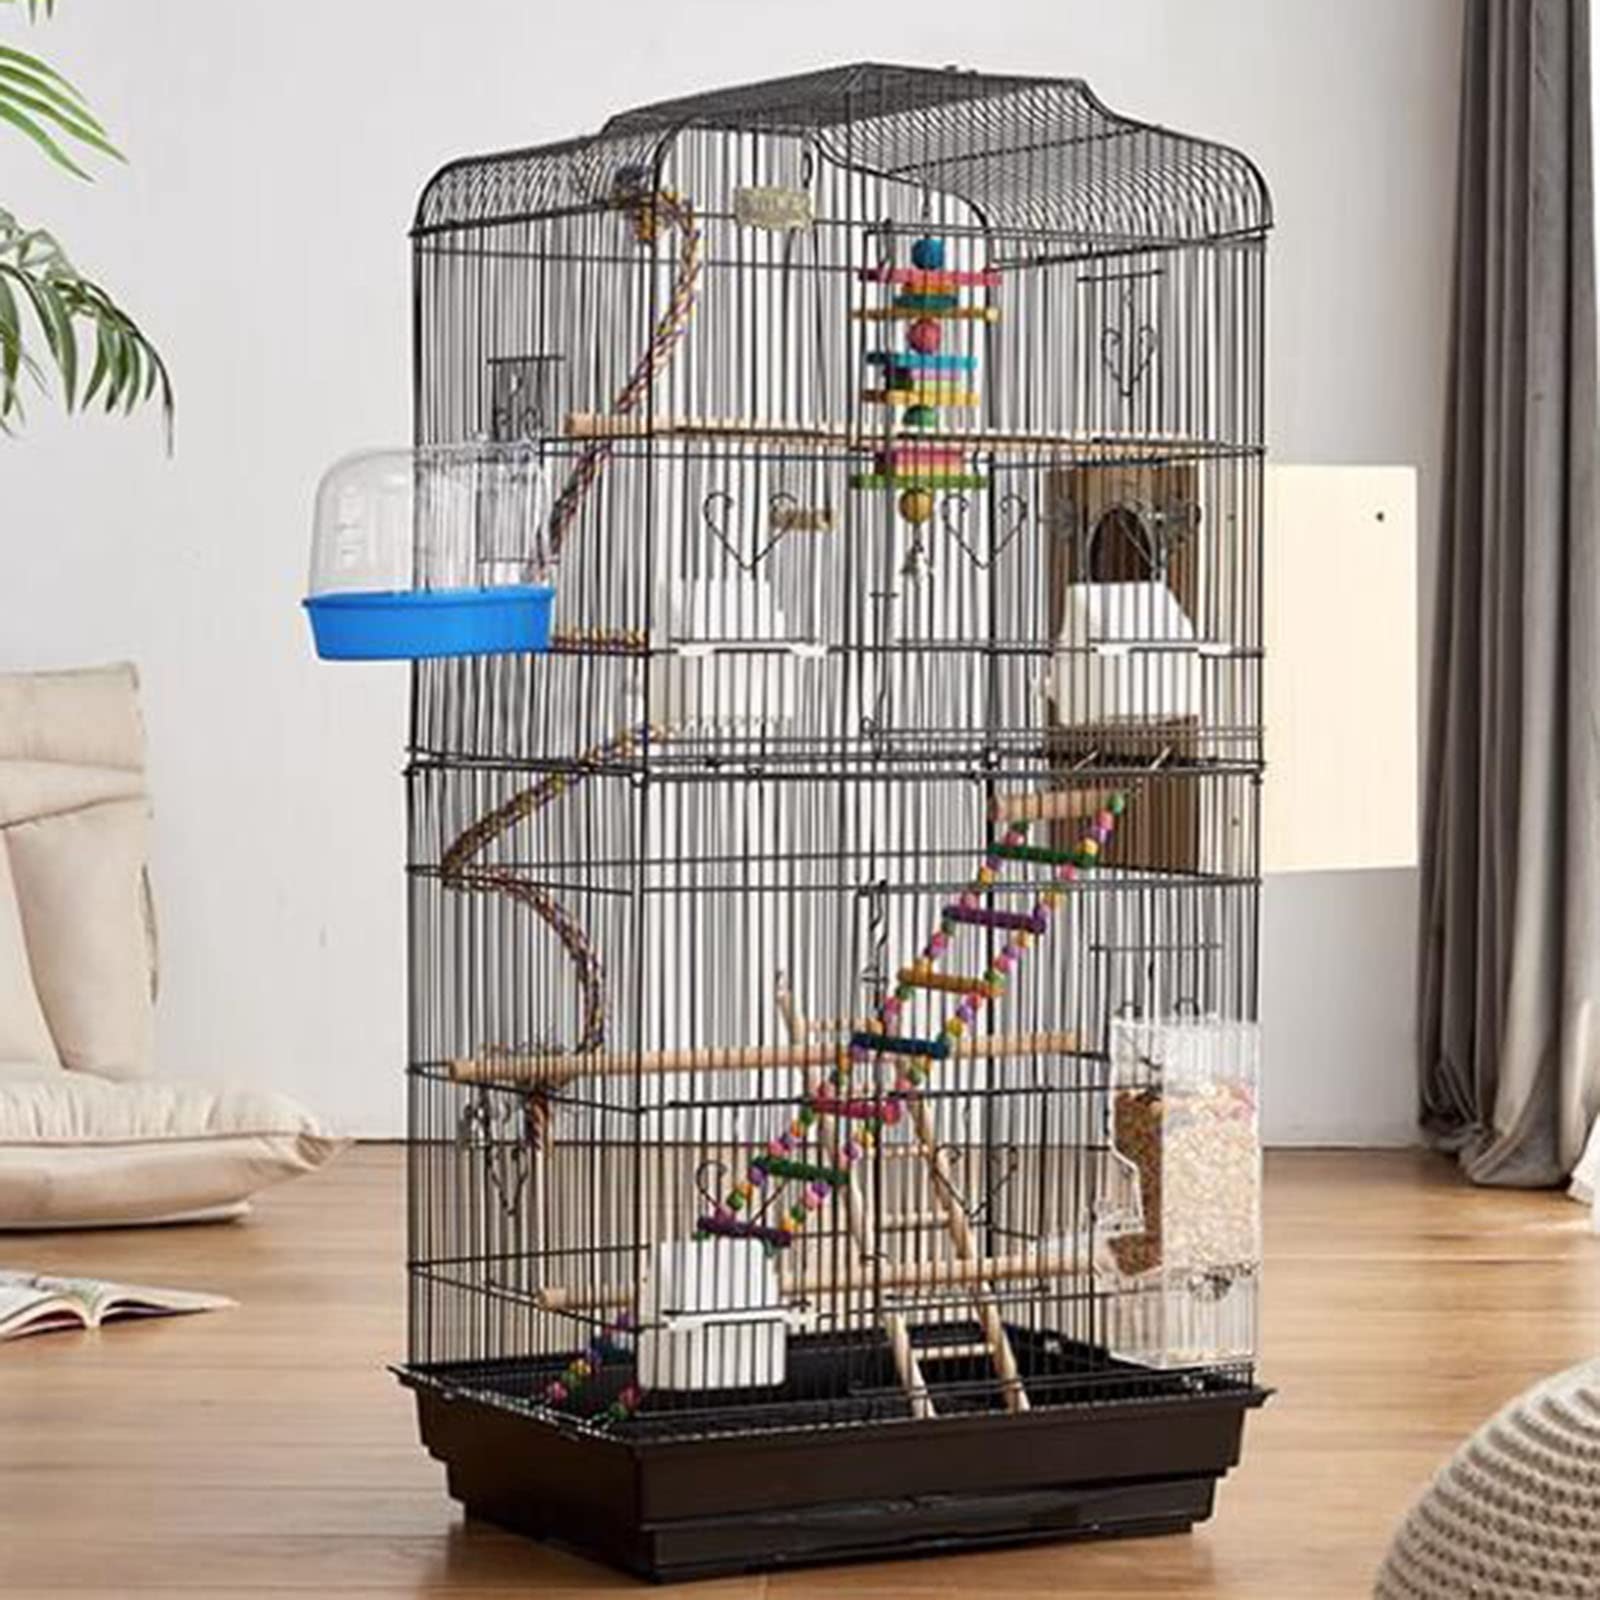 bird accessories for cages